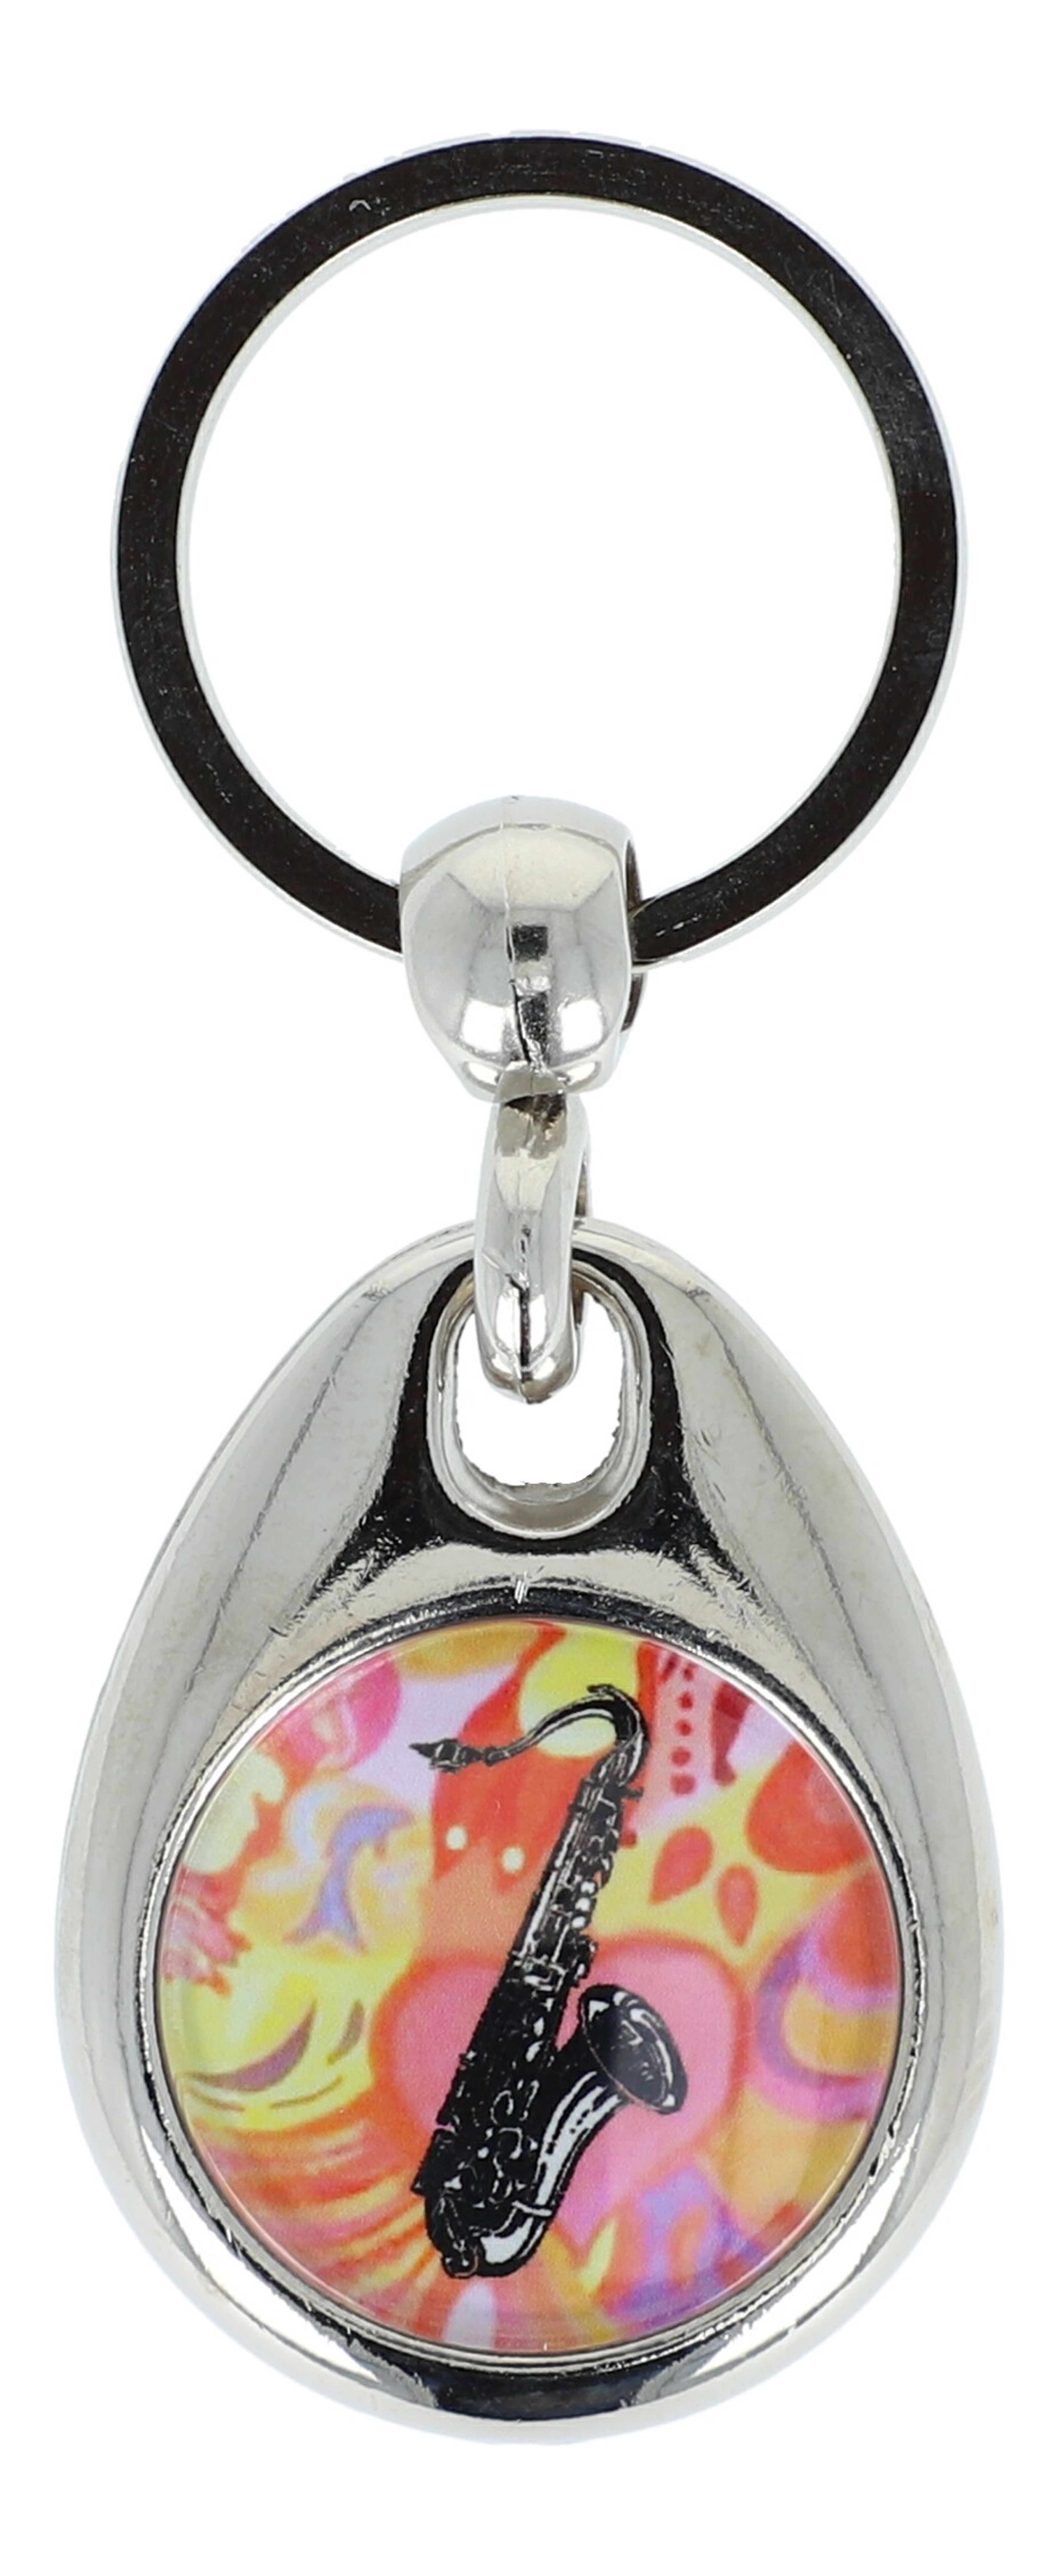 Buy wholesale colorful keychains with motifs instruments musical (double-sided) and